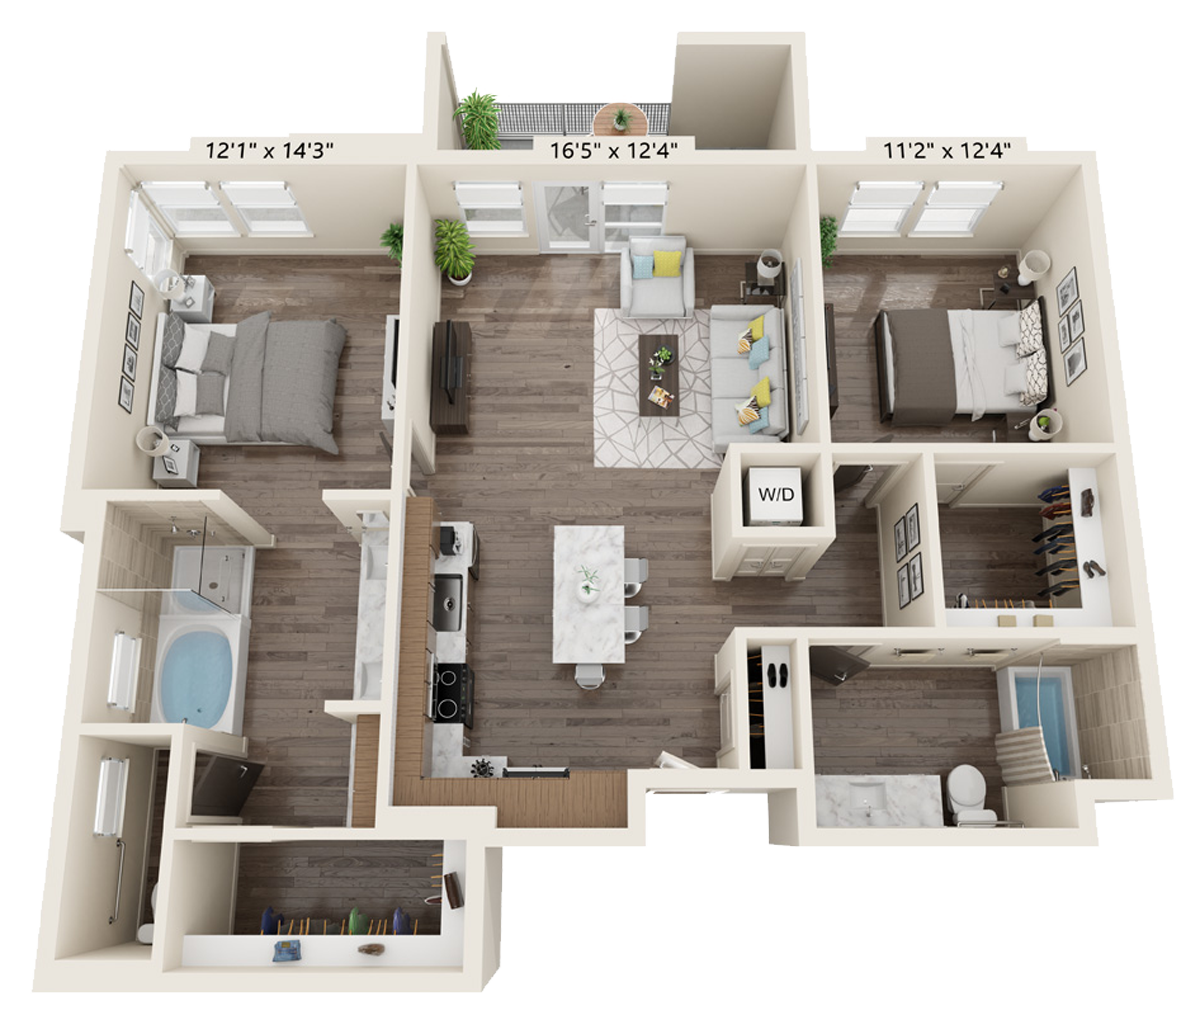 B2E floor plan 2 bed, 2 bath and is 1206 square feet